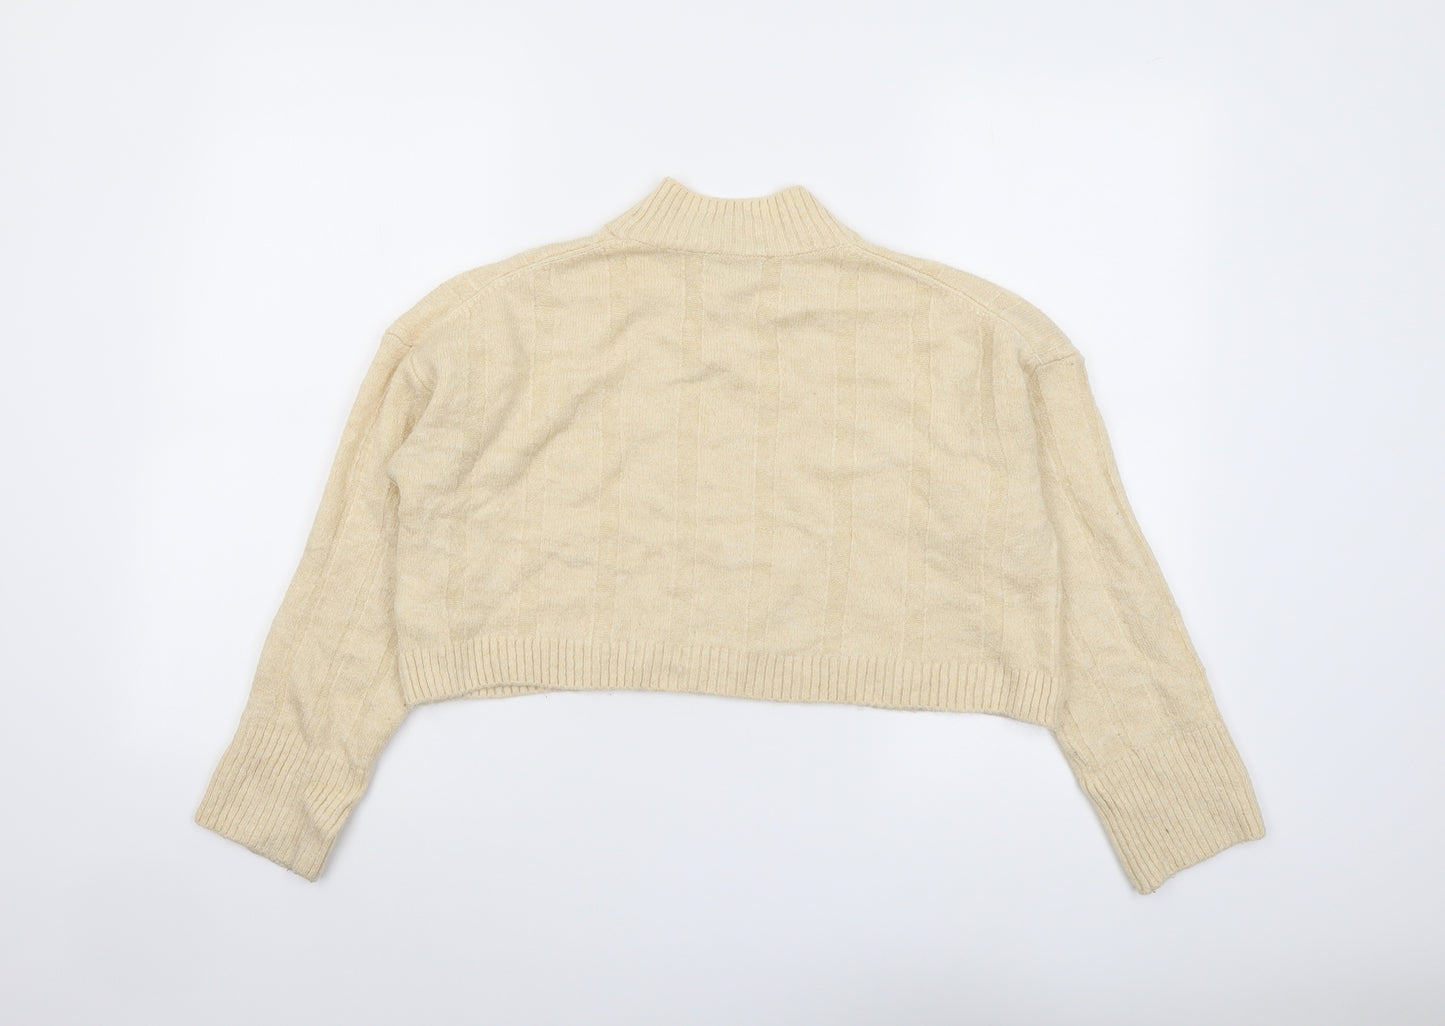 Zara Womens Ivory High Neck Acrylic Pullover Jumper Size S